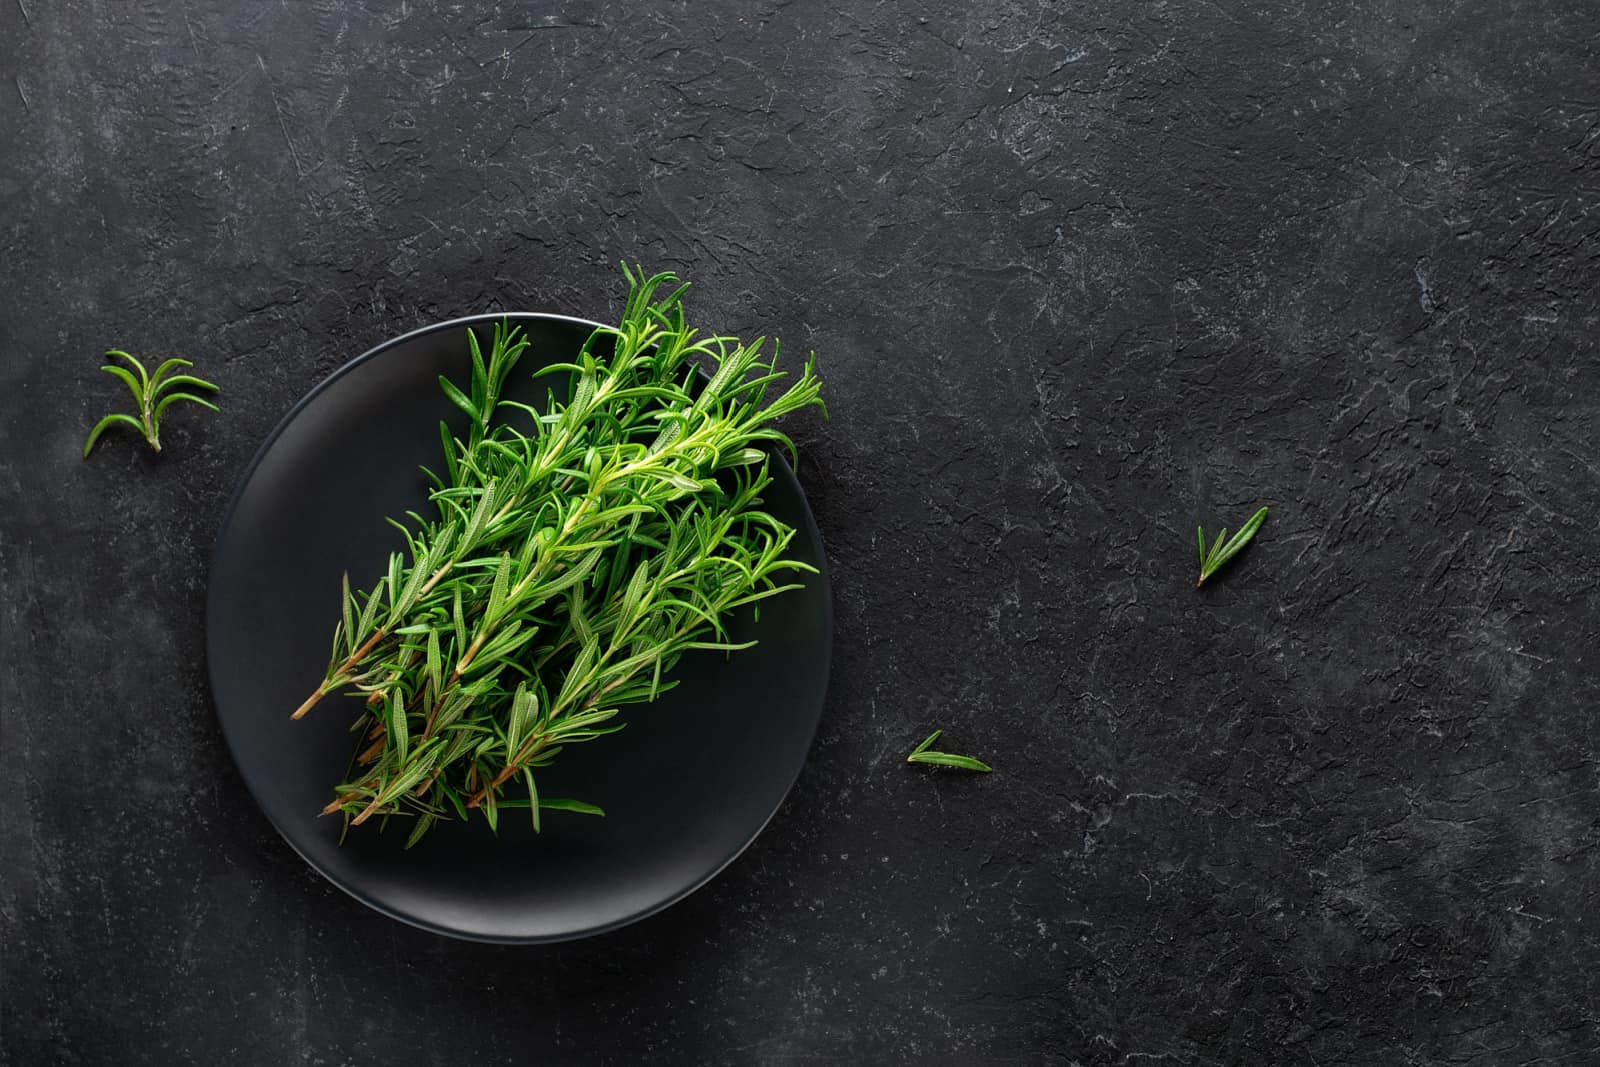 Rosemary herb on a plate on a black background